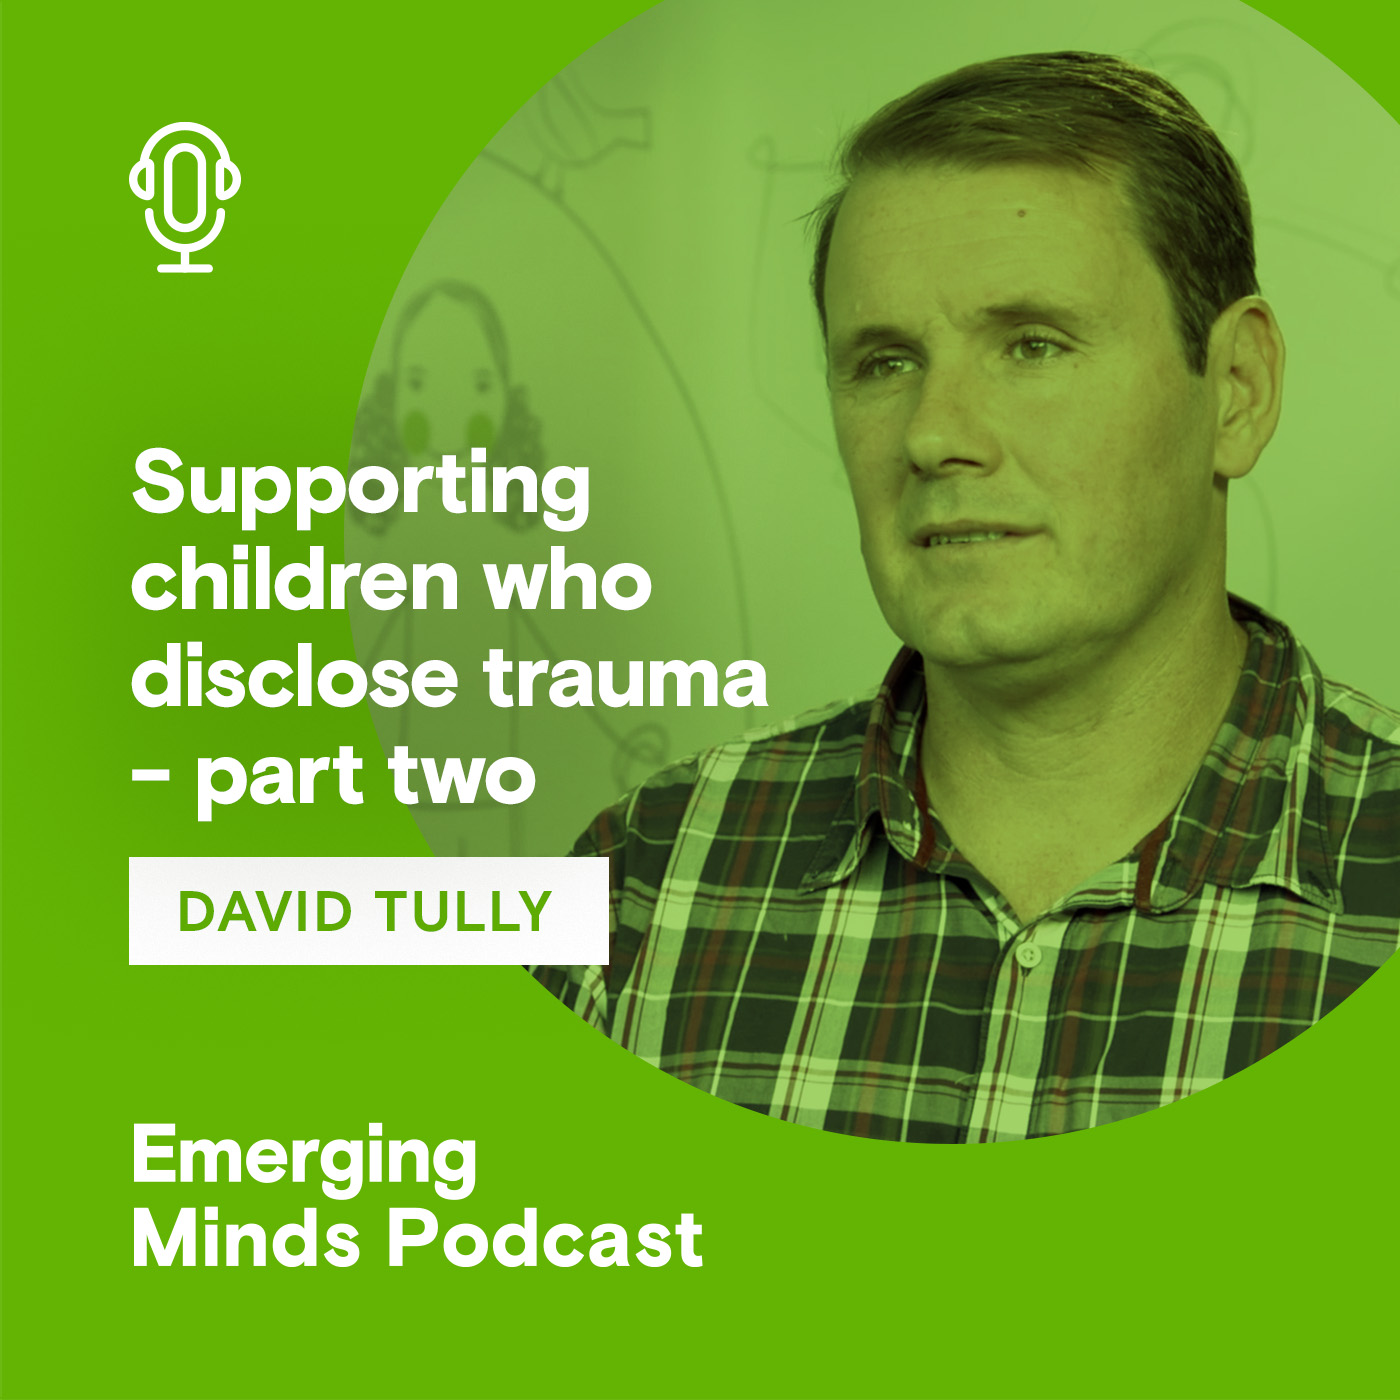 Supporting children who disclose trauma - part two